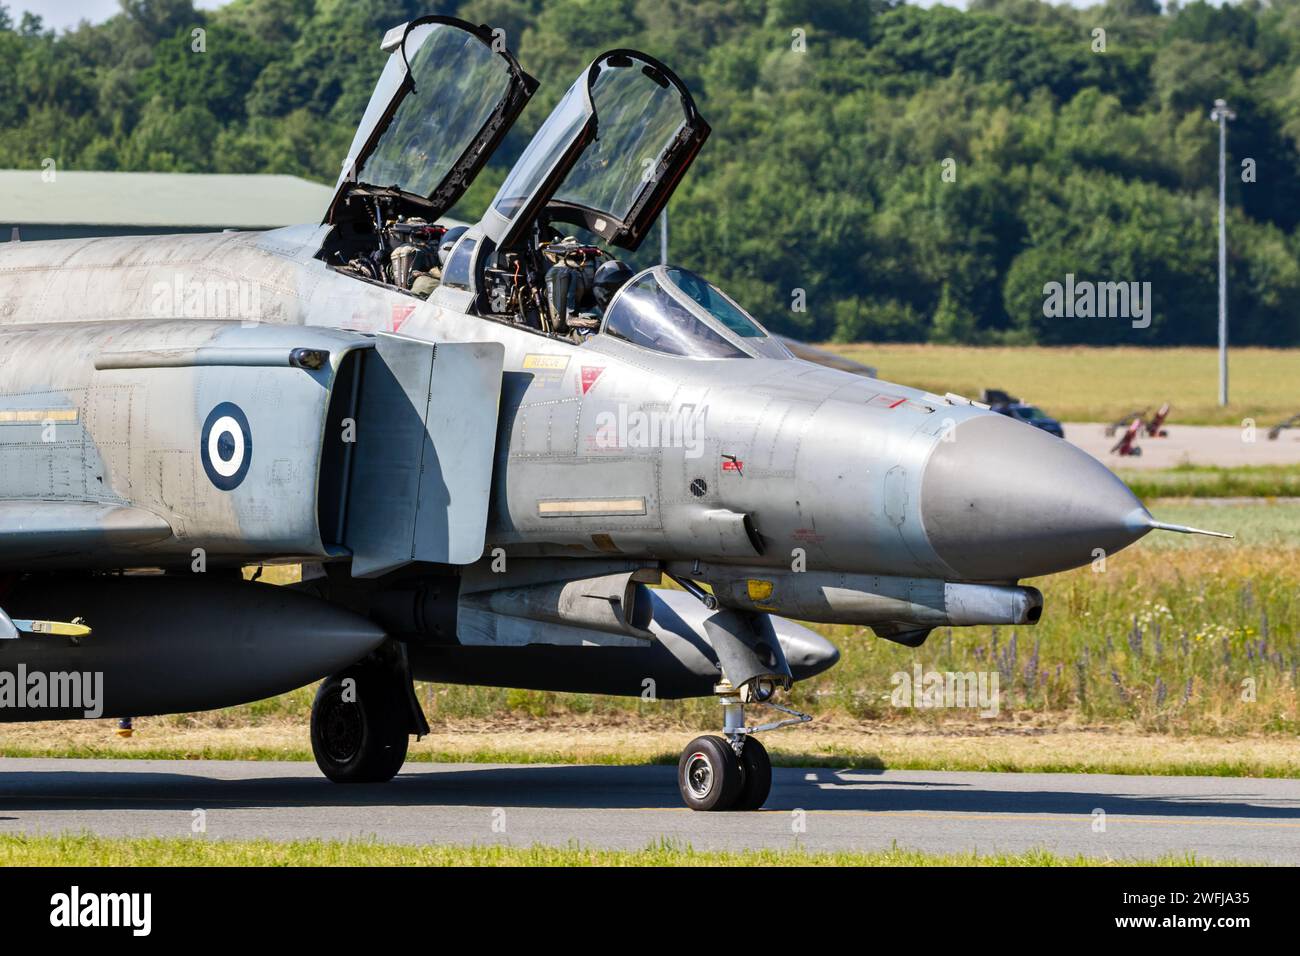 F-4 Phantom fighter jet from the Hellenic Air Force taxiing towards the runway of Florennes airbase. Belgium - June 15, 2017 Stock Photo